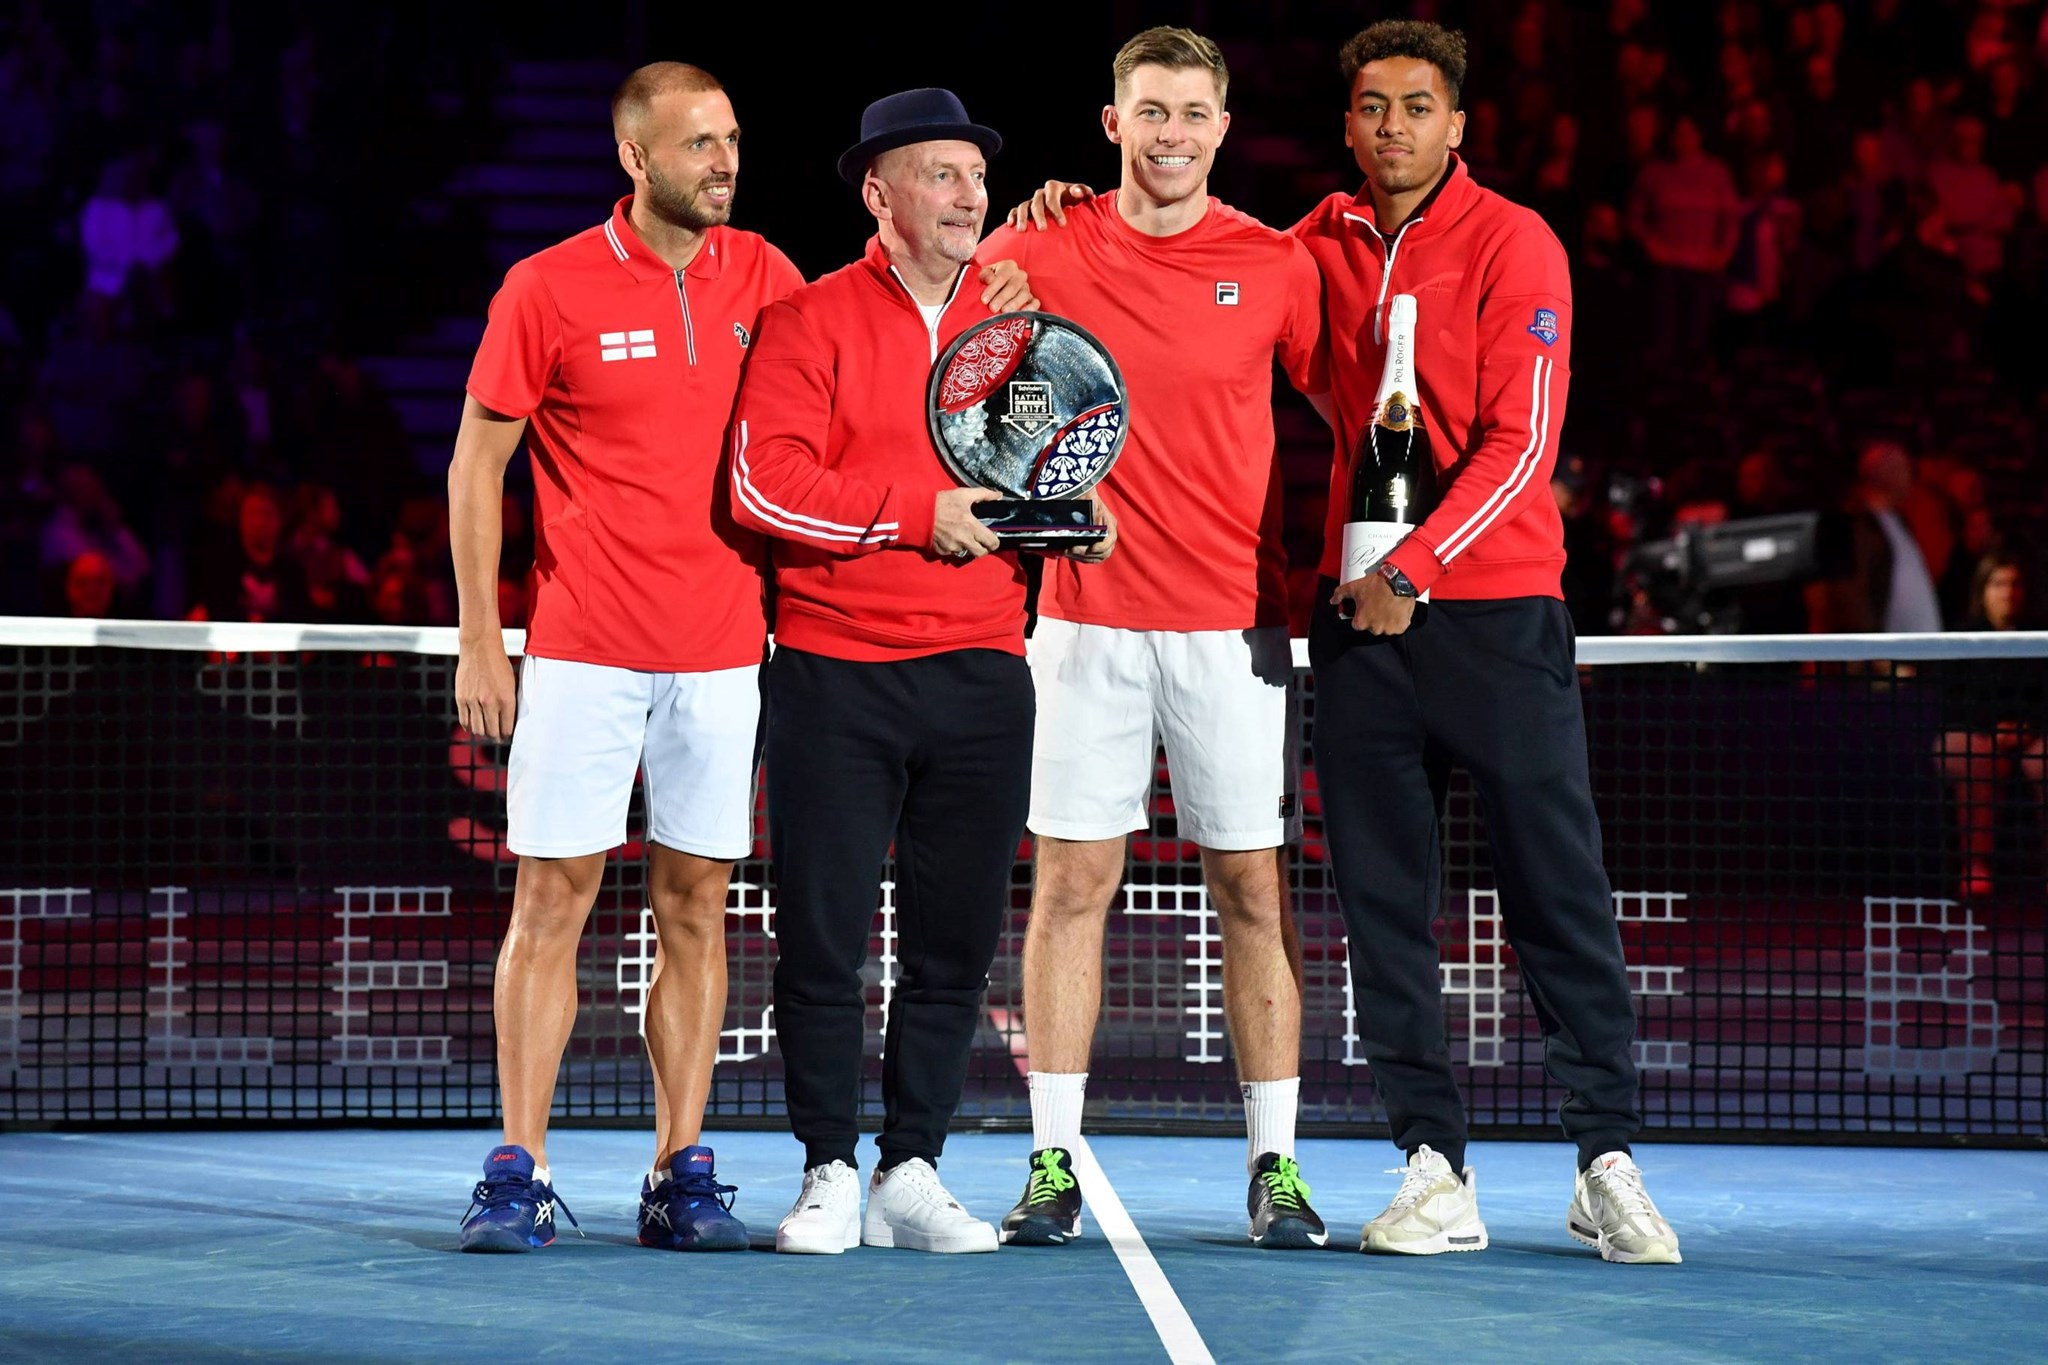 Team England seal victory at Battle of the Brits LTA